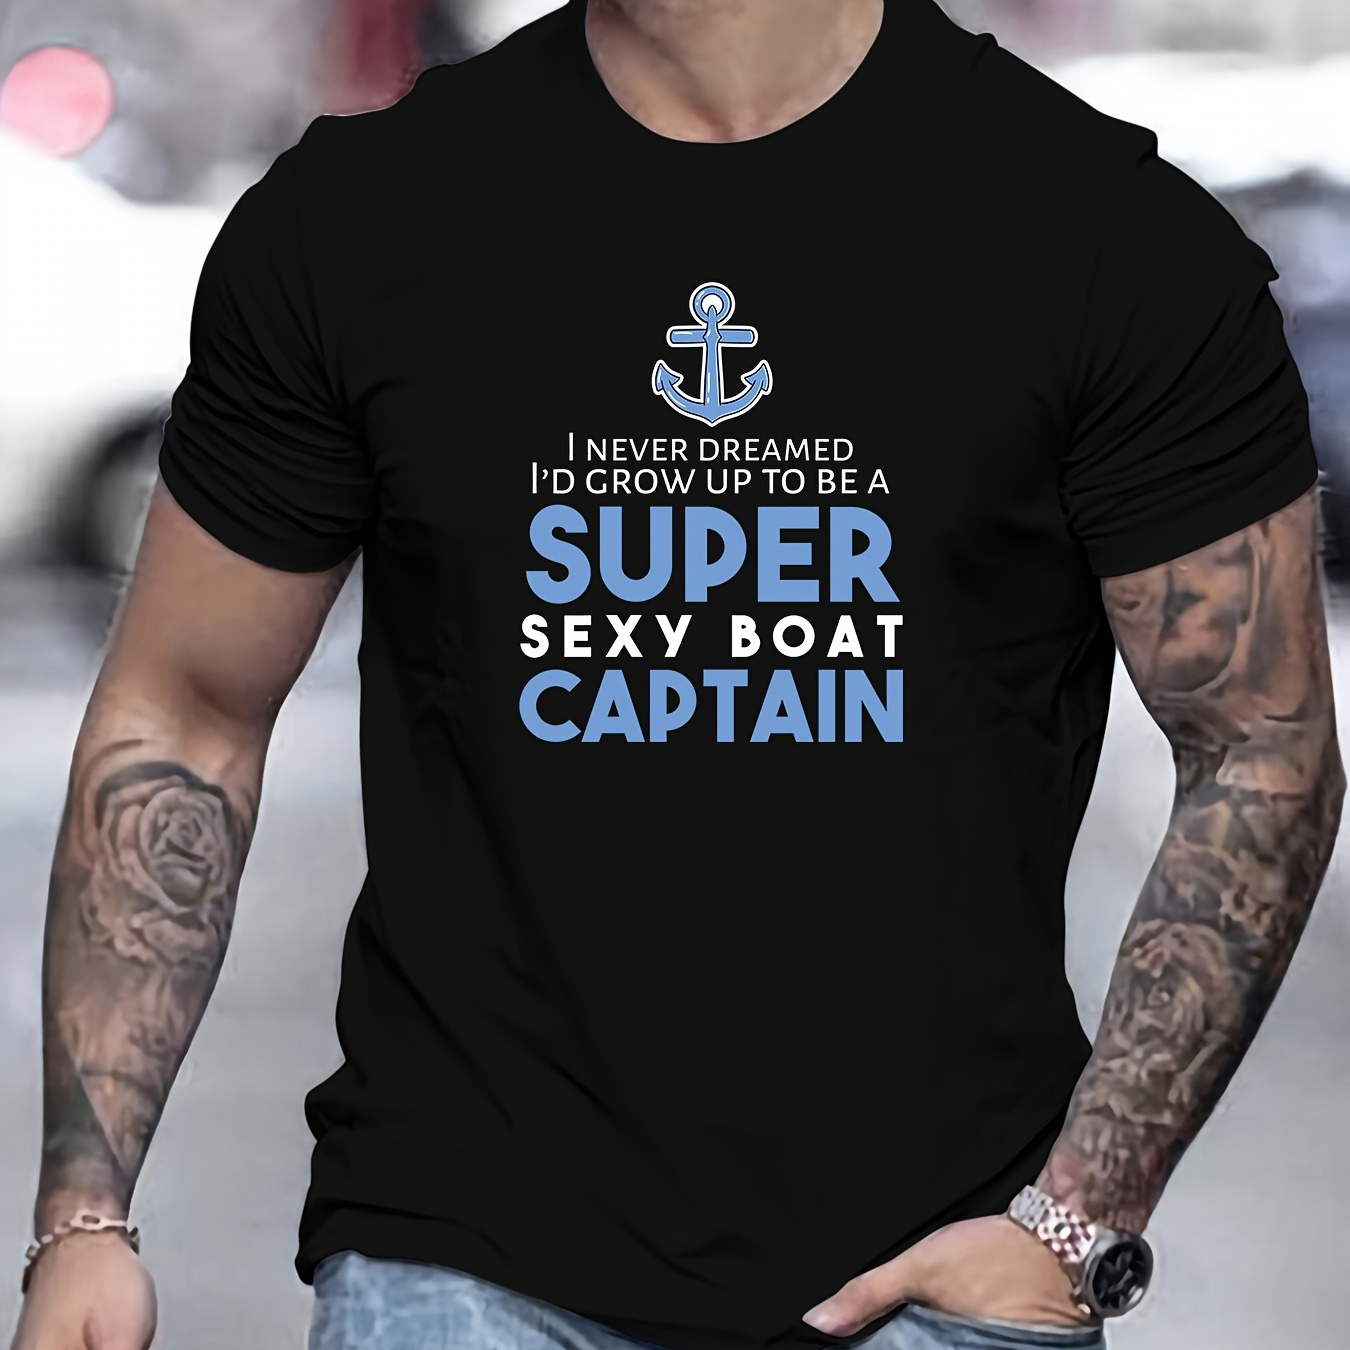 

Super Captain Print, Men's Round Crew Neck Short Sleeve, Simple Style Tee Fashion Regular Fit T-shirt, Casual Comfy Top For Spring Summer Holiday Leisure Vacation Men's Clothing As Gift